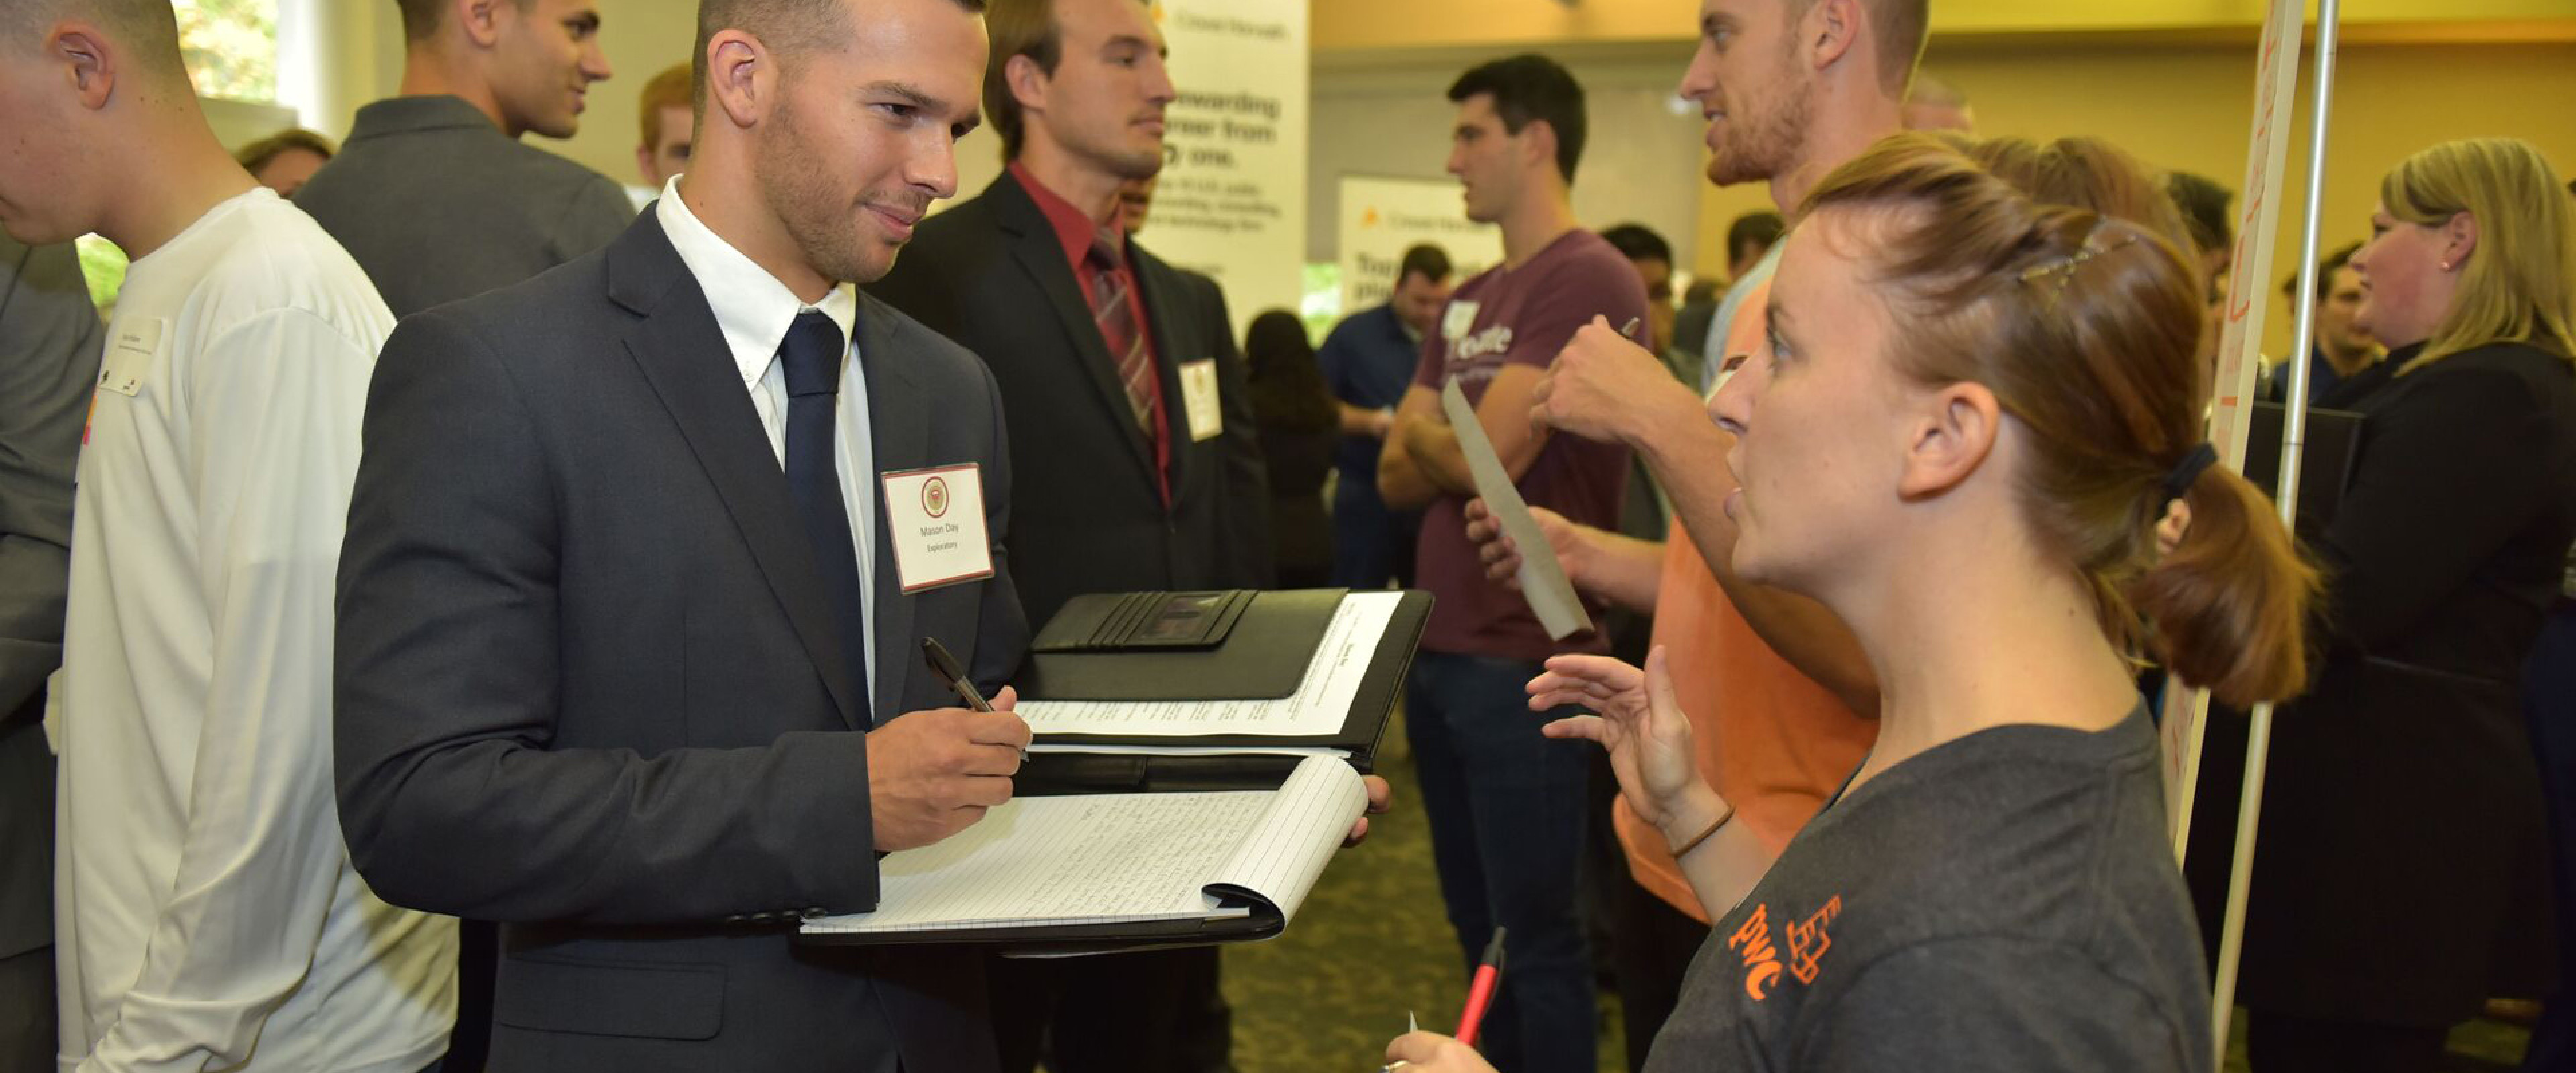 Student in professional dress speaking with a recruiter during career fair.